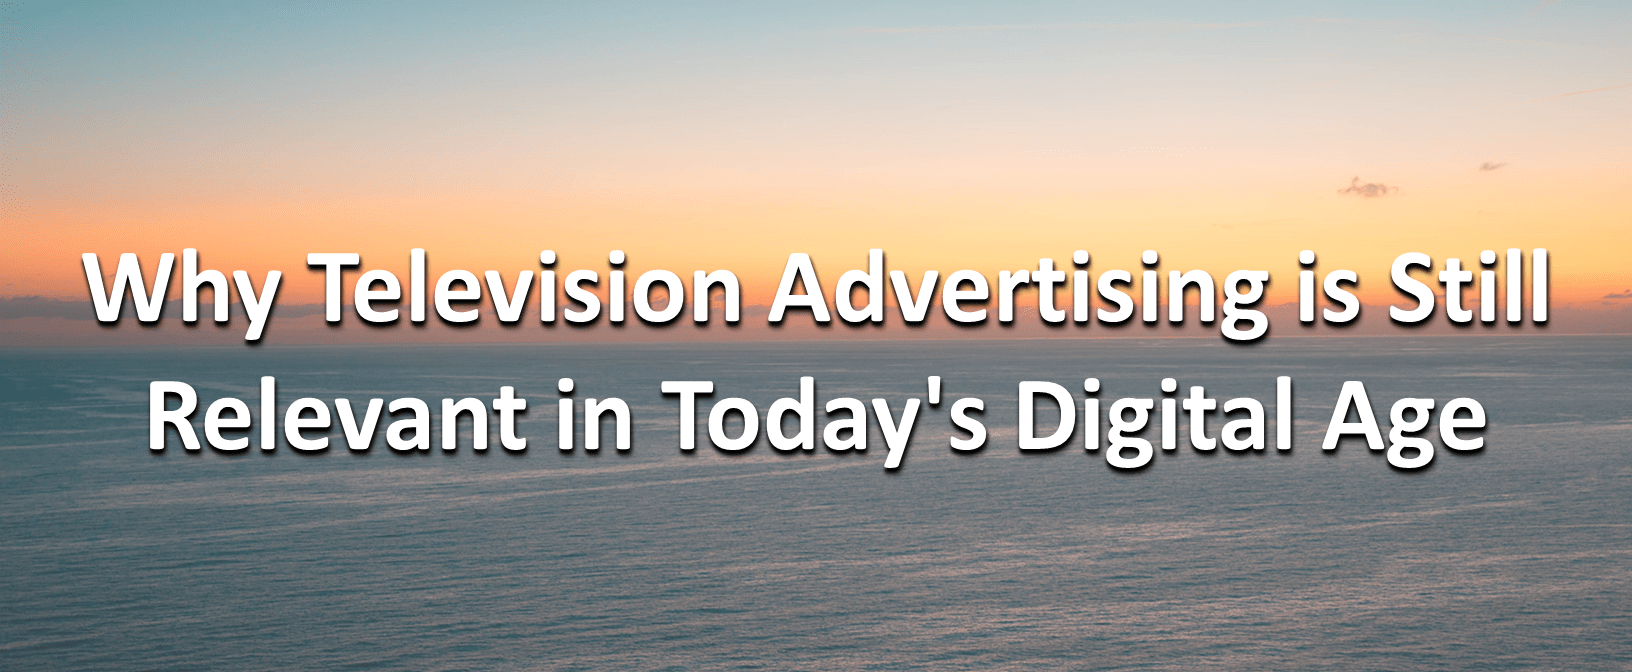 Why television advertising is still relevant